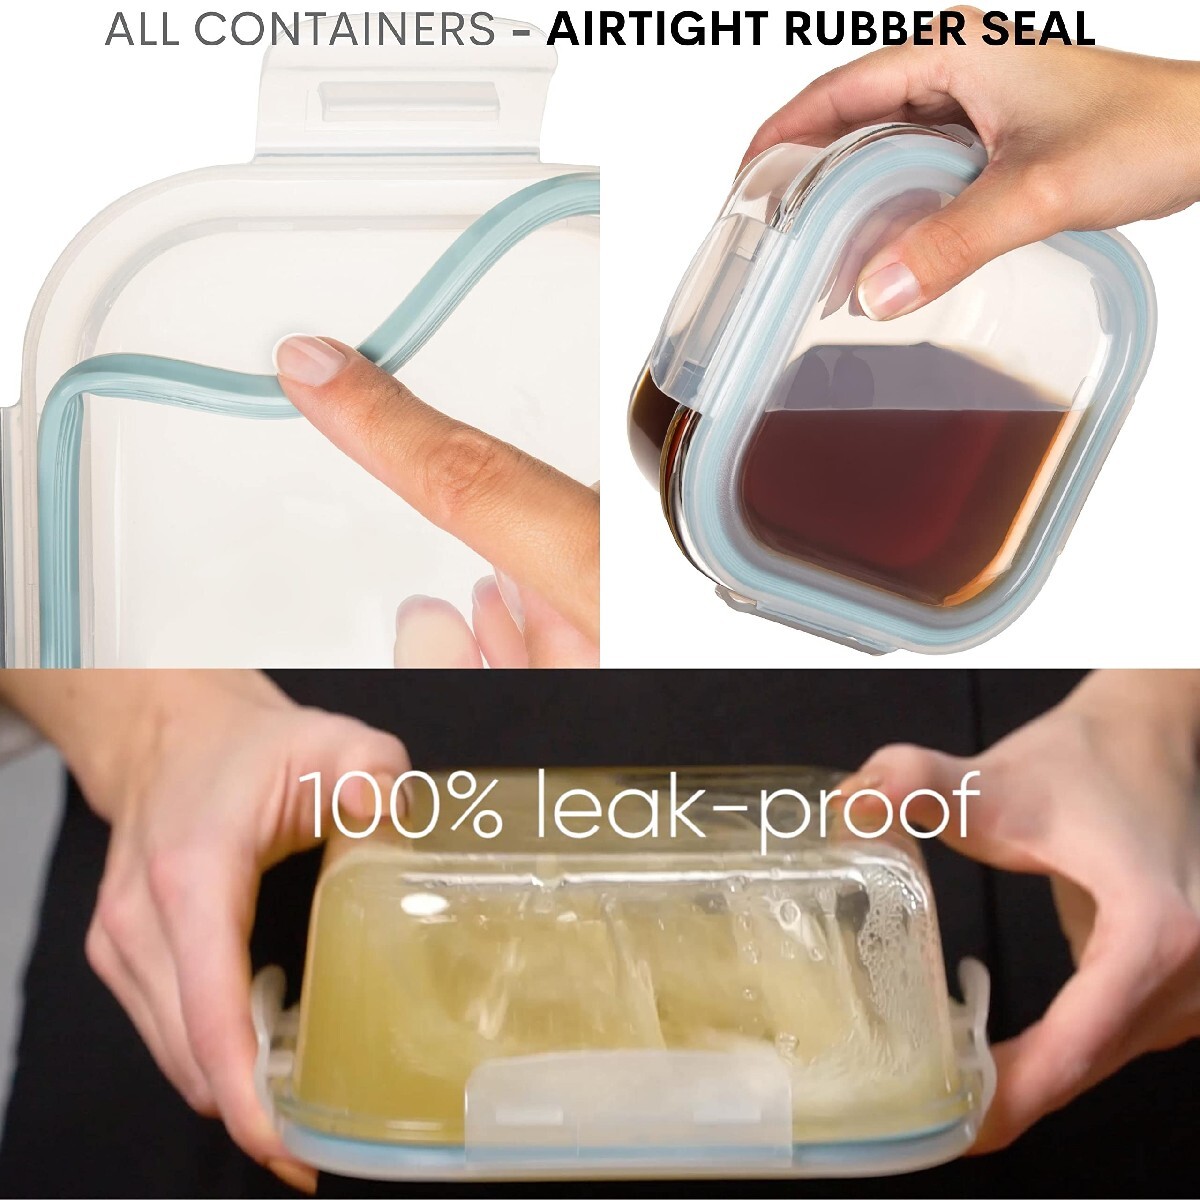 [9.99 Today Only ]35 Pc Set Glass Food Storage Containers with Lids - Glass Meal Prep Containers Airtight Glass Bento Boxes BPA-Free 100% Leak Proof